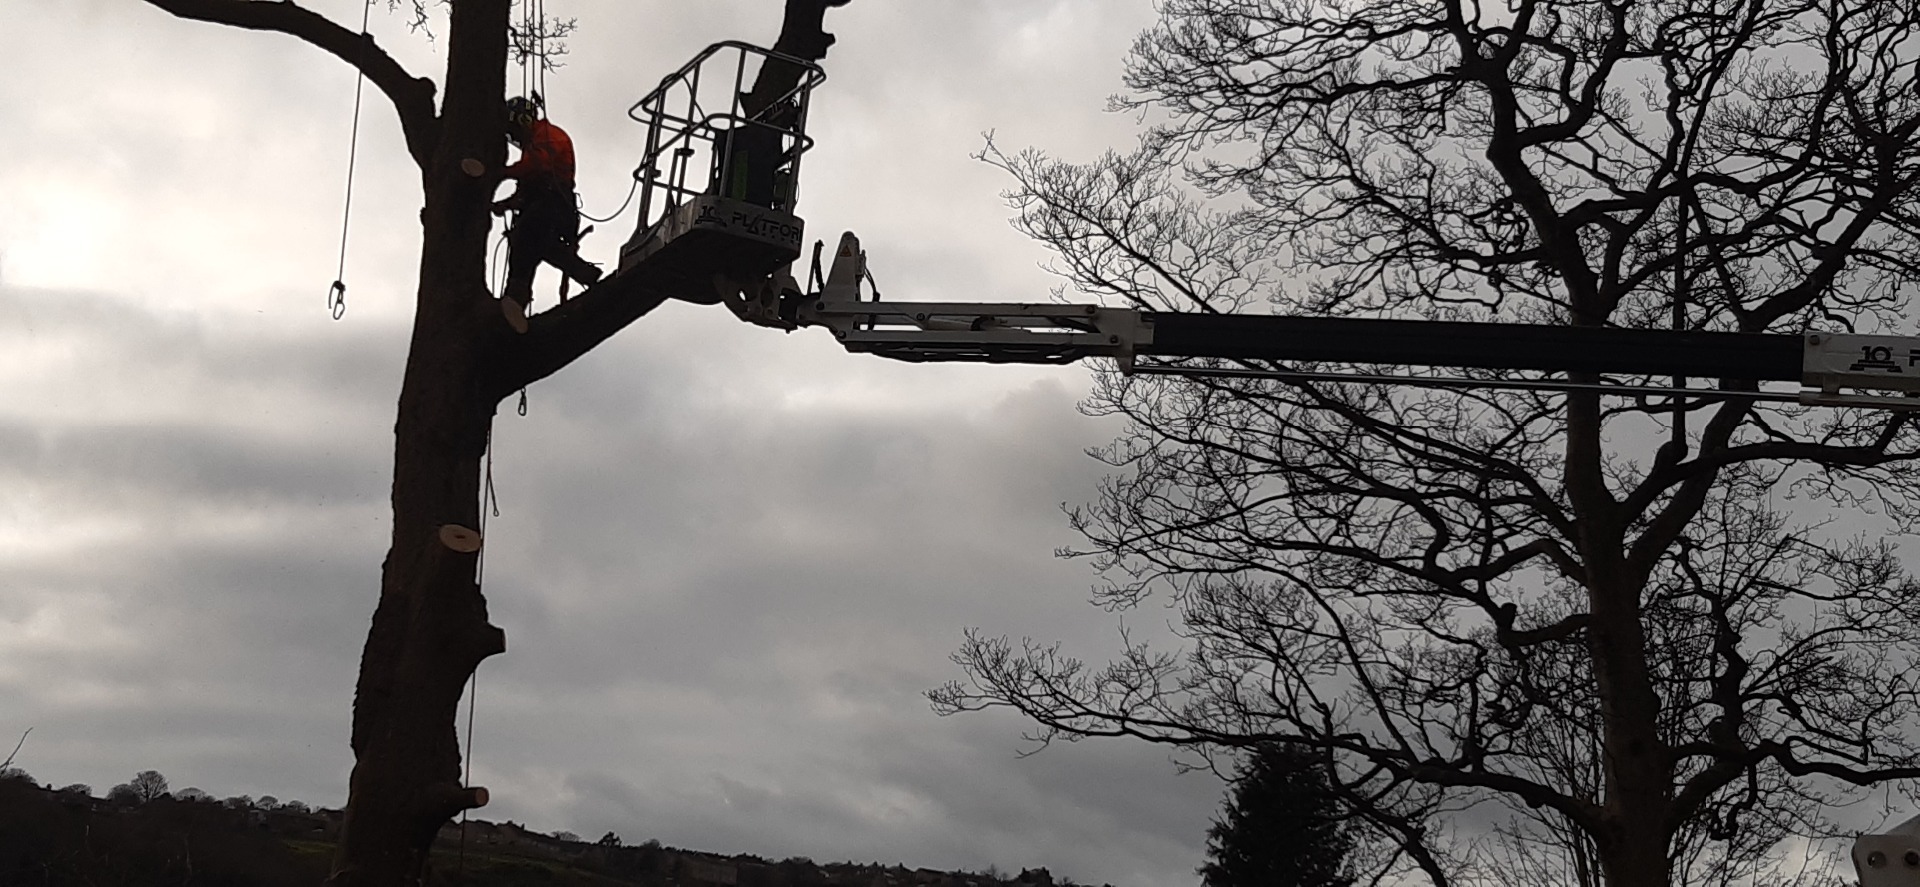 Our client climbing the lower limbs after setting up a safe rope system.